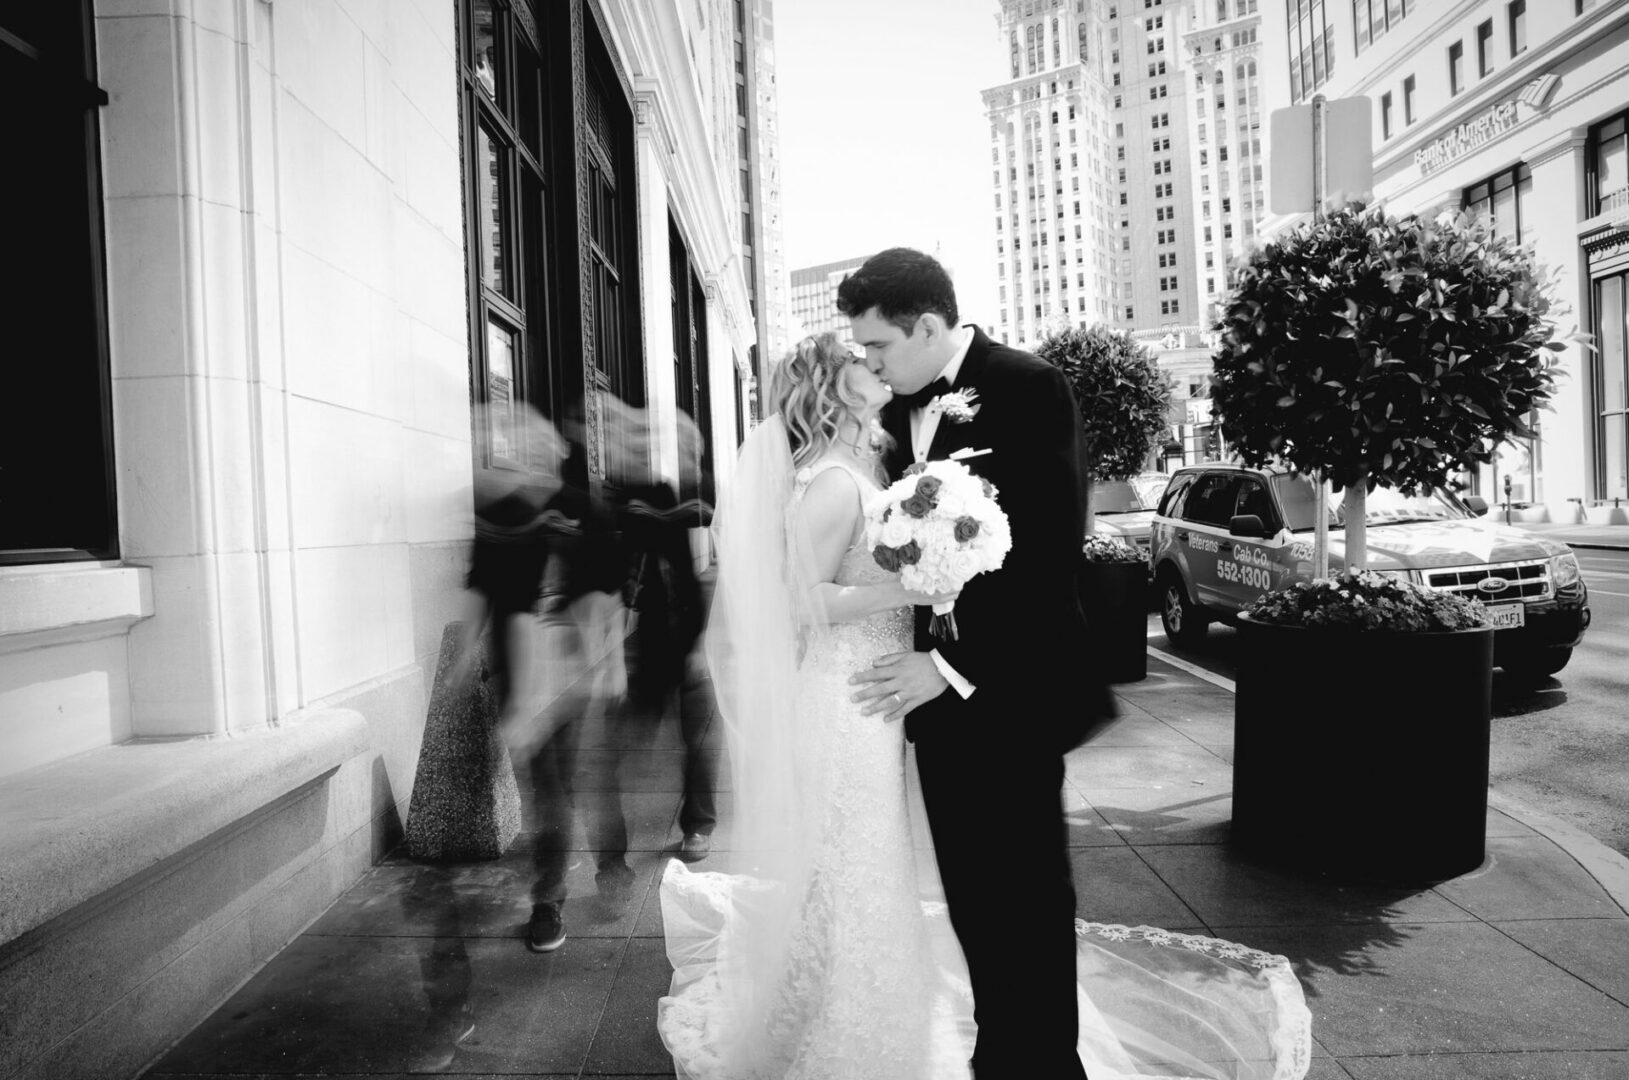 Black and white image of a couple kissing on street